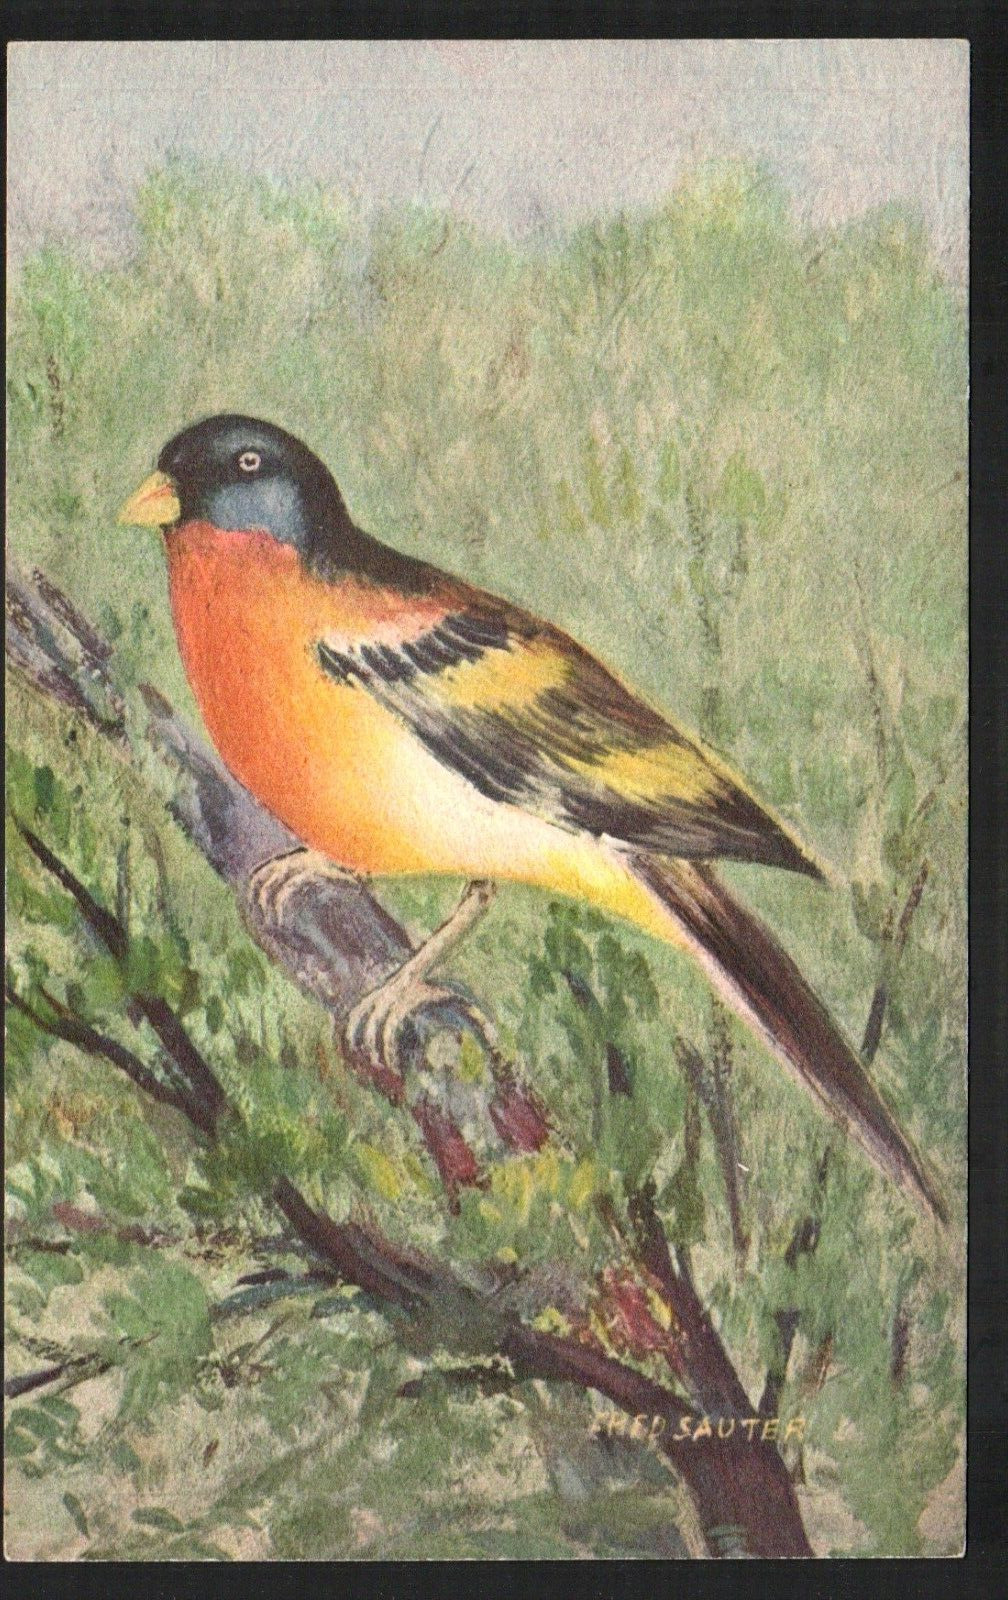 Old Postcard Bird signed by Artist Fred Sauter Orange Breast Yellow /black wings